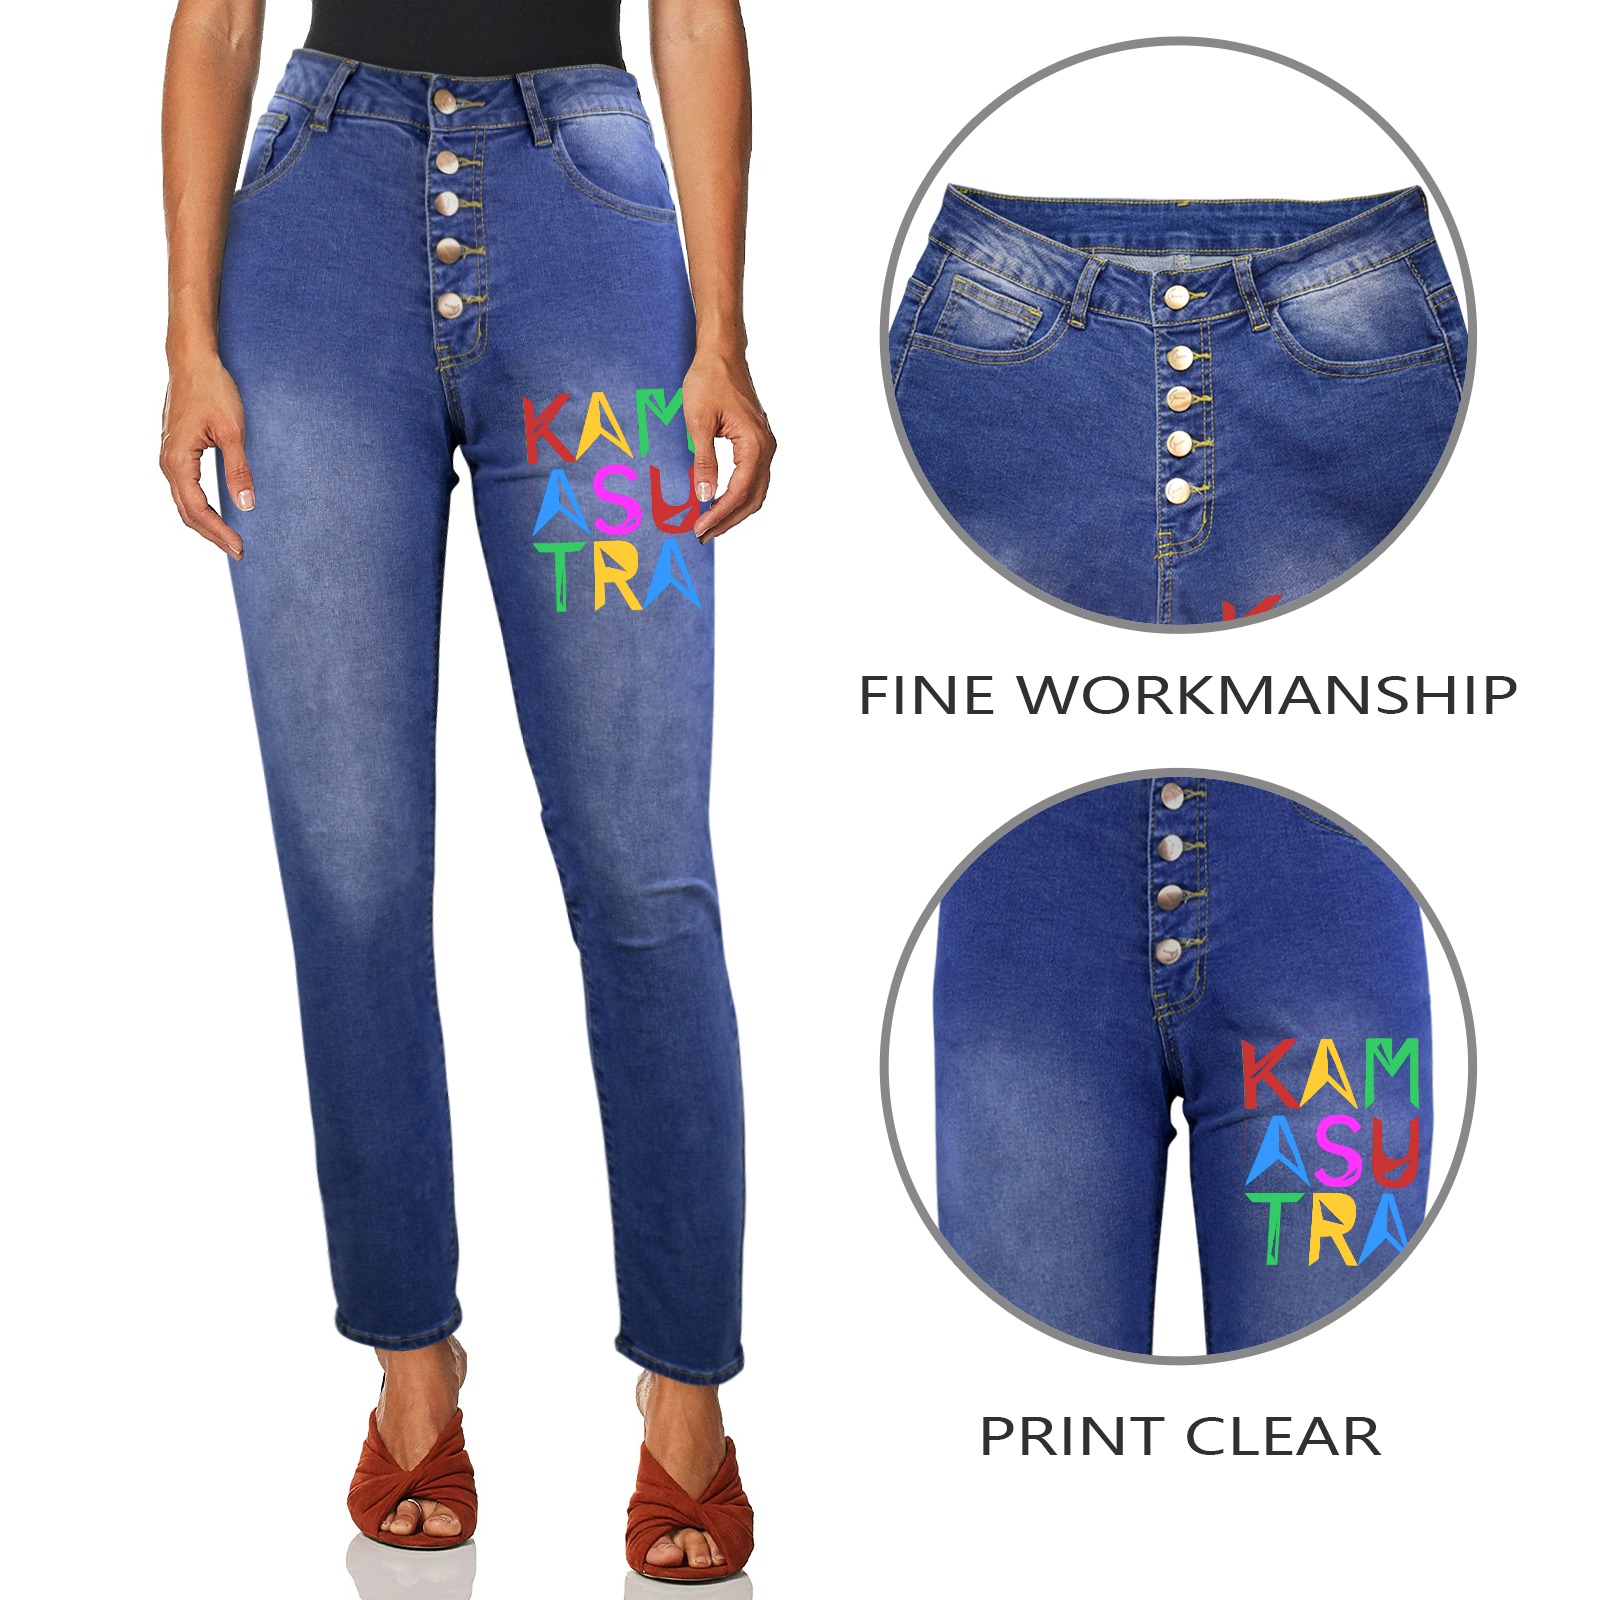 Kamasutra elegant colorful text typography art. Women's Jeans (Front Printing)